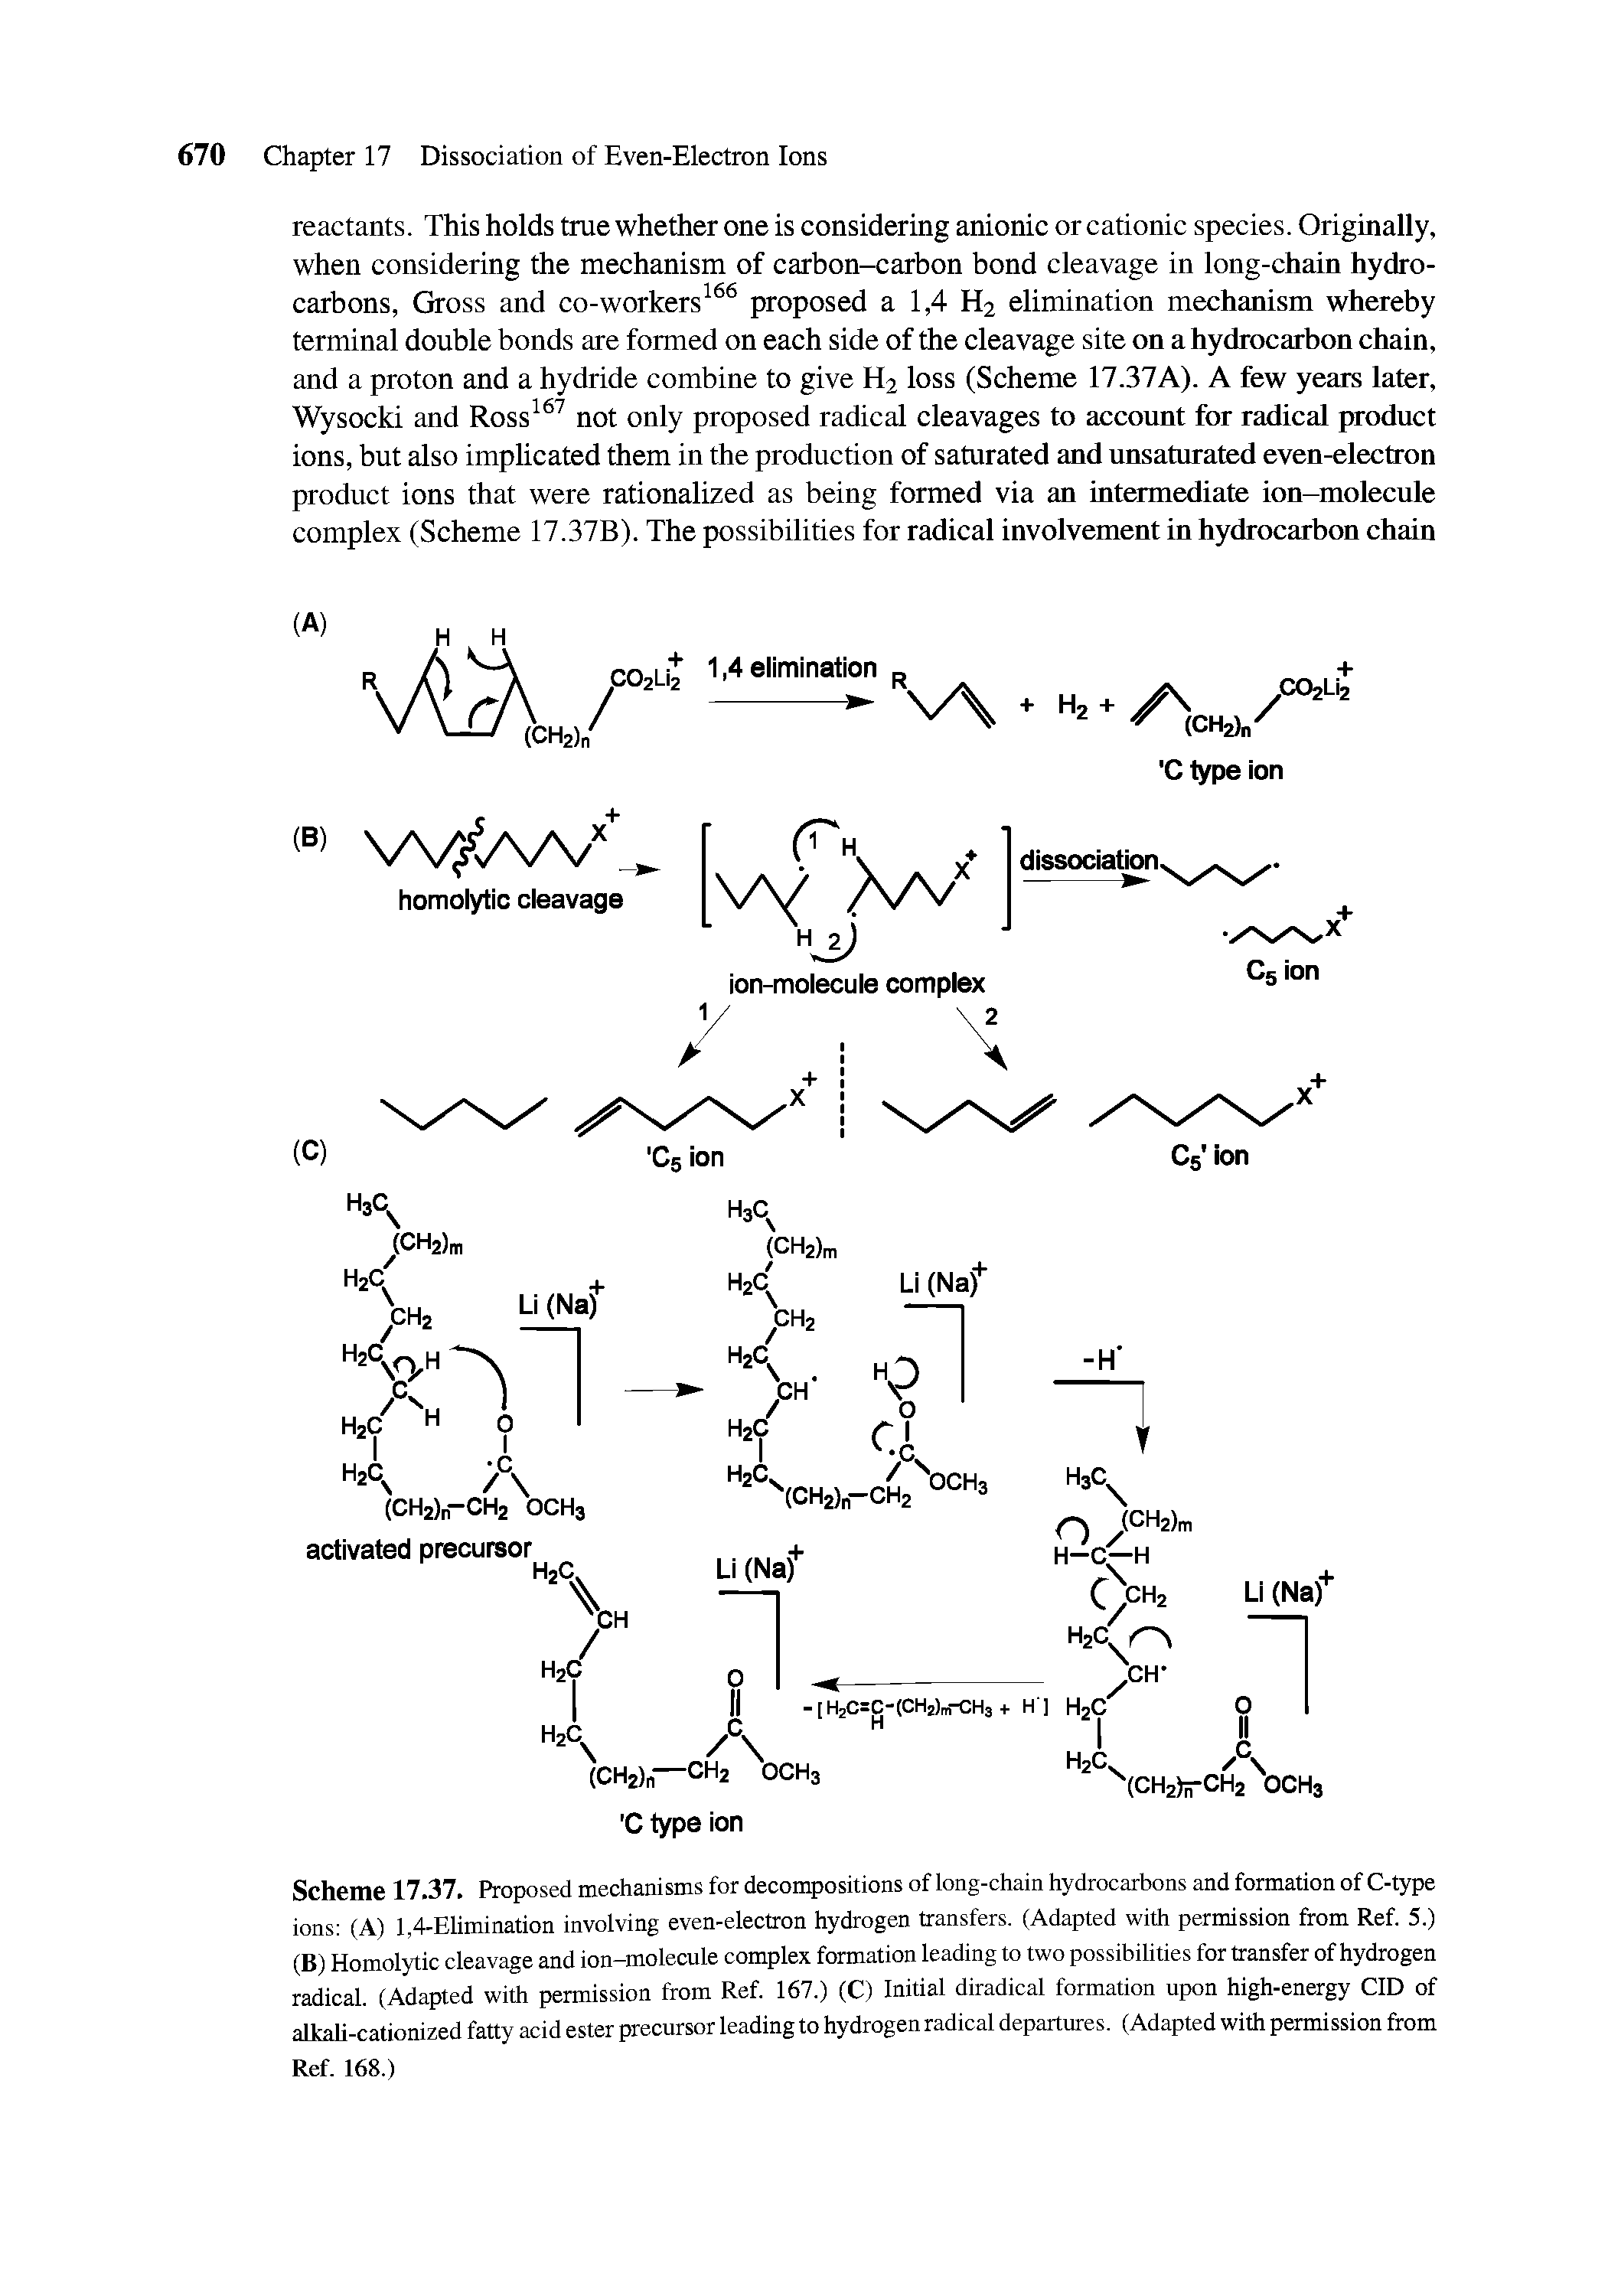 Scheme 17.37. Proposed mechanisms for decompositions of long-chain hydrocarbons and formation of C-type ions (A) 1,4-Elimination involving even-electron hydrogen transfers. (Adapted with permission from Ref. 5.) (B) Homolytic cleavage and ion-molecule complex formation leading to two possibilities for transfer of hydrogen radical. (Adapted with permission from Ref. 167.) (C) Initial diradical formation upon high-energy CID of alkaU-cationized fatty acid ester precursor leading to hydrogen radical departures. (Adapted with permission from Ref. 168.)...